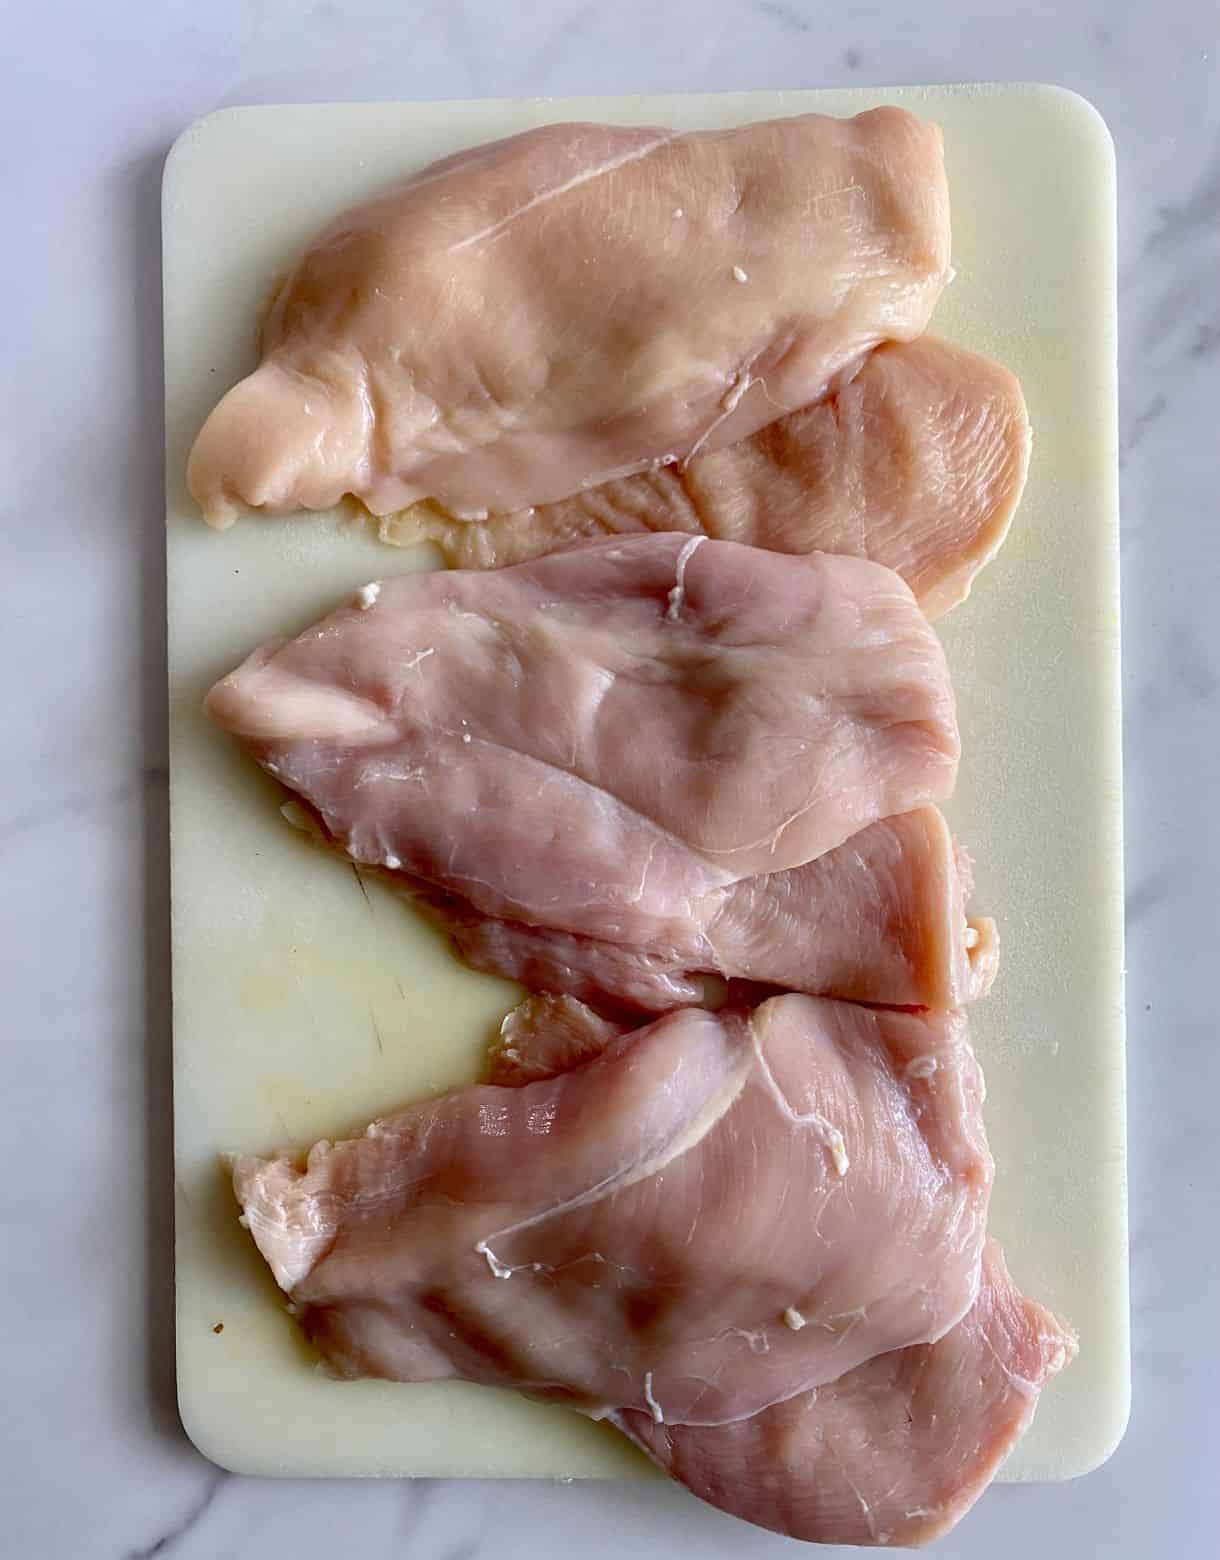 A cutting board with chicken breasts sliced into cutlets.